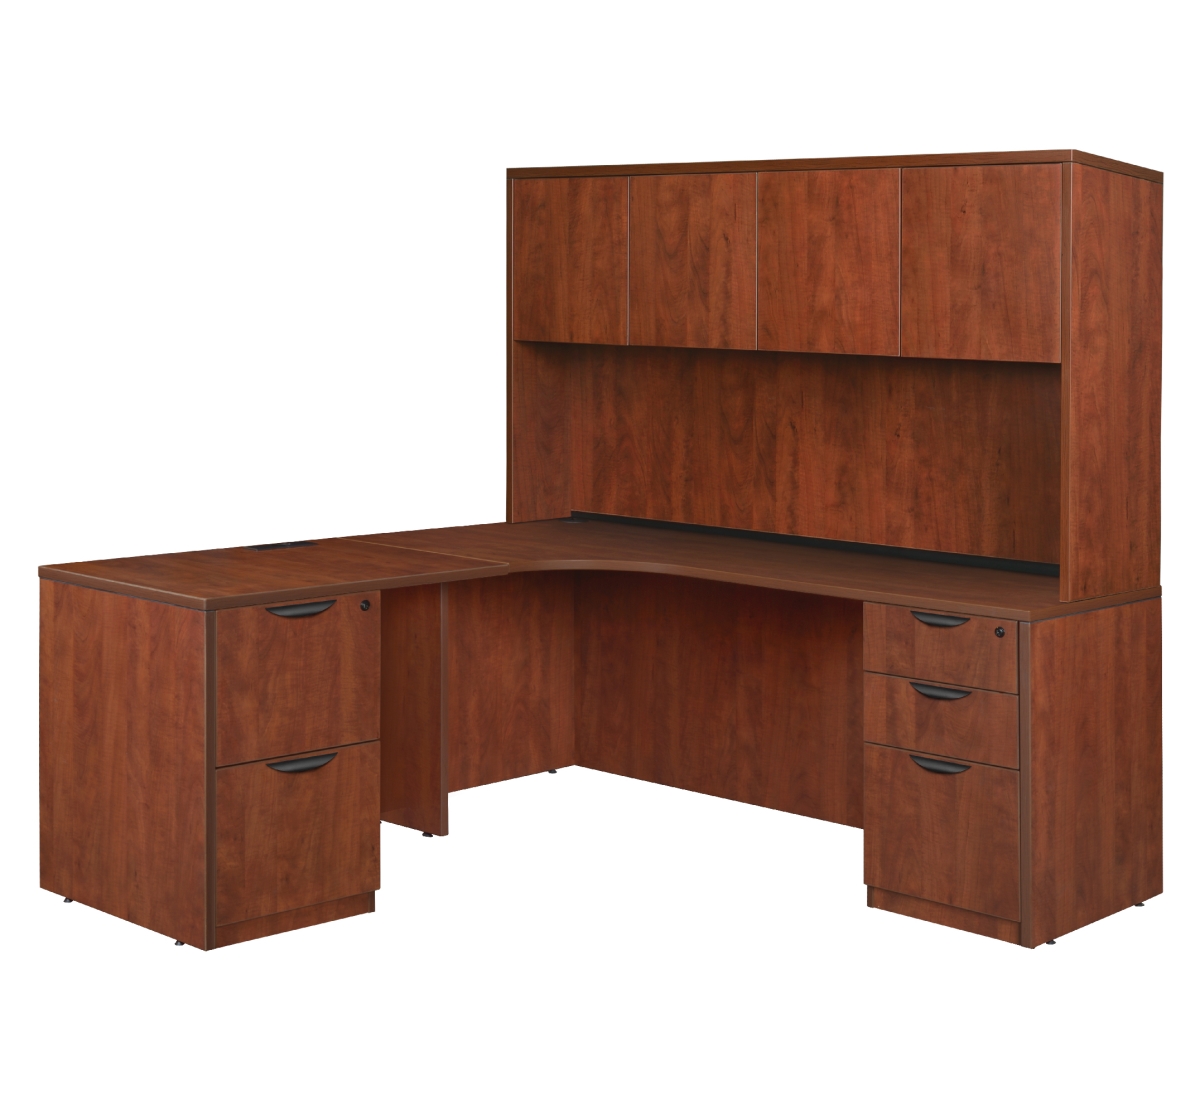 Lldclfphch Legacy 71 In. Double Full Pedestal Left Corner Credenza With 35 In. Return & Hutch, Cherry